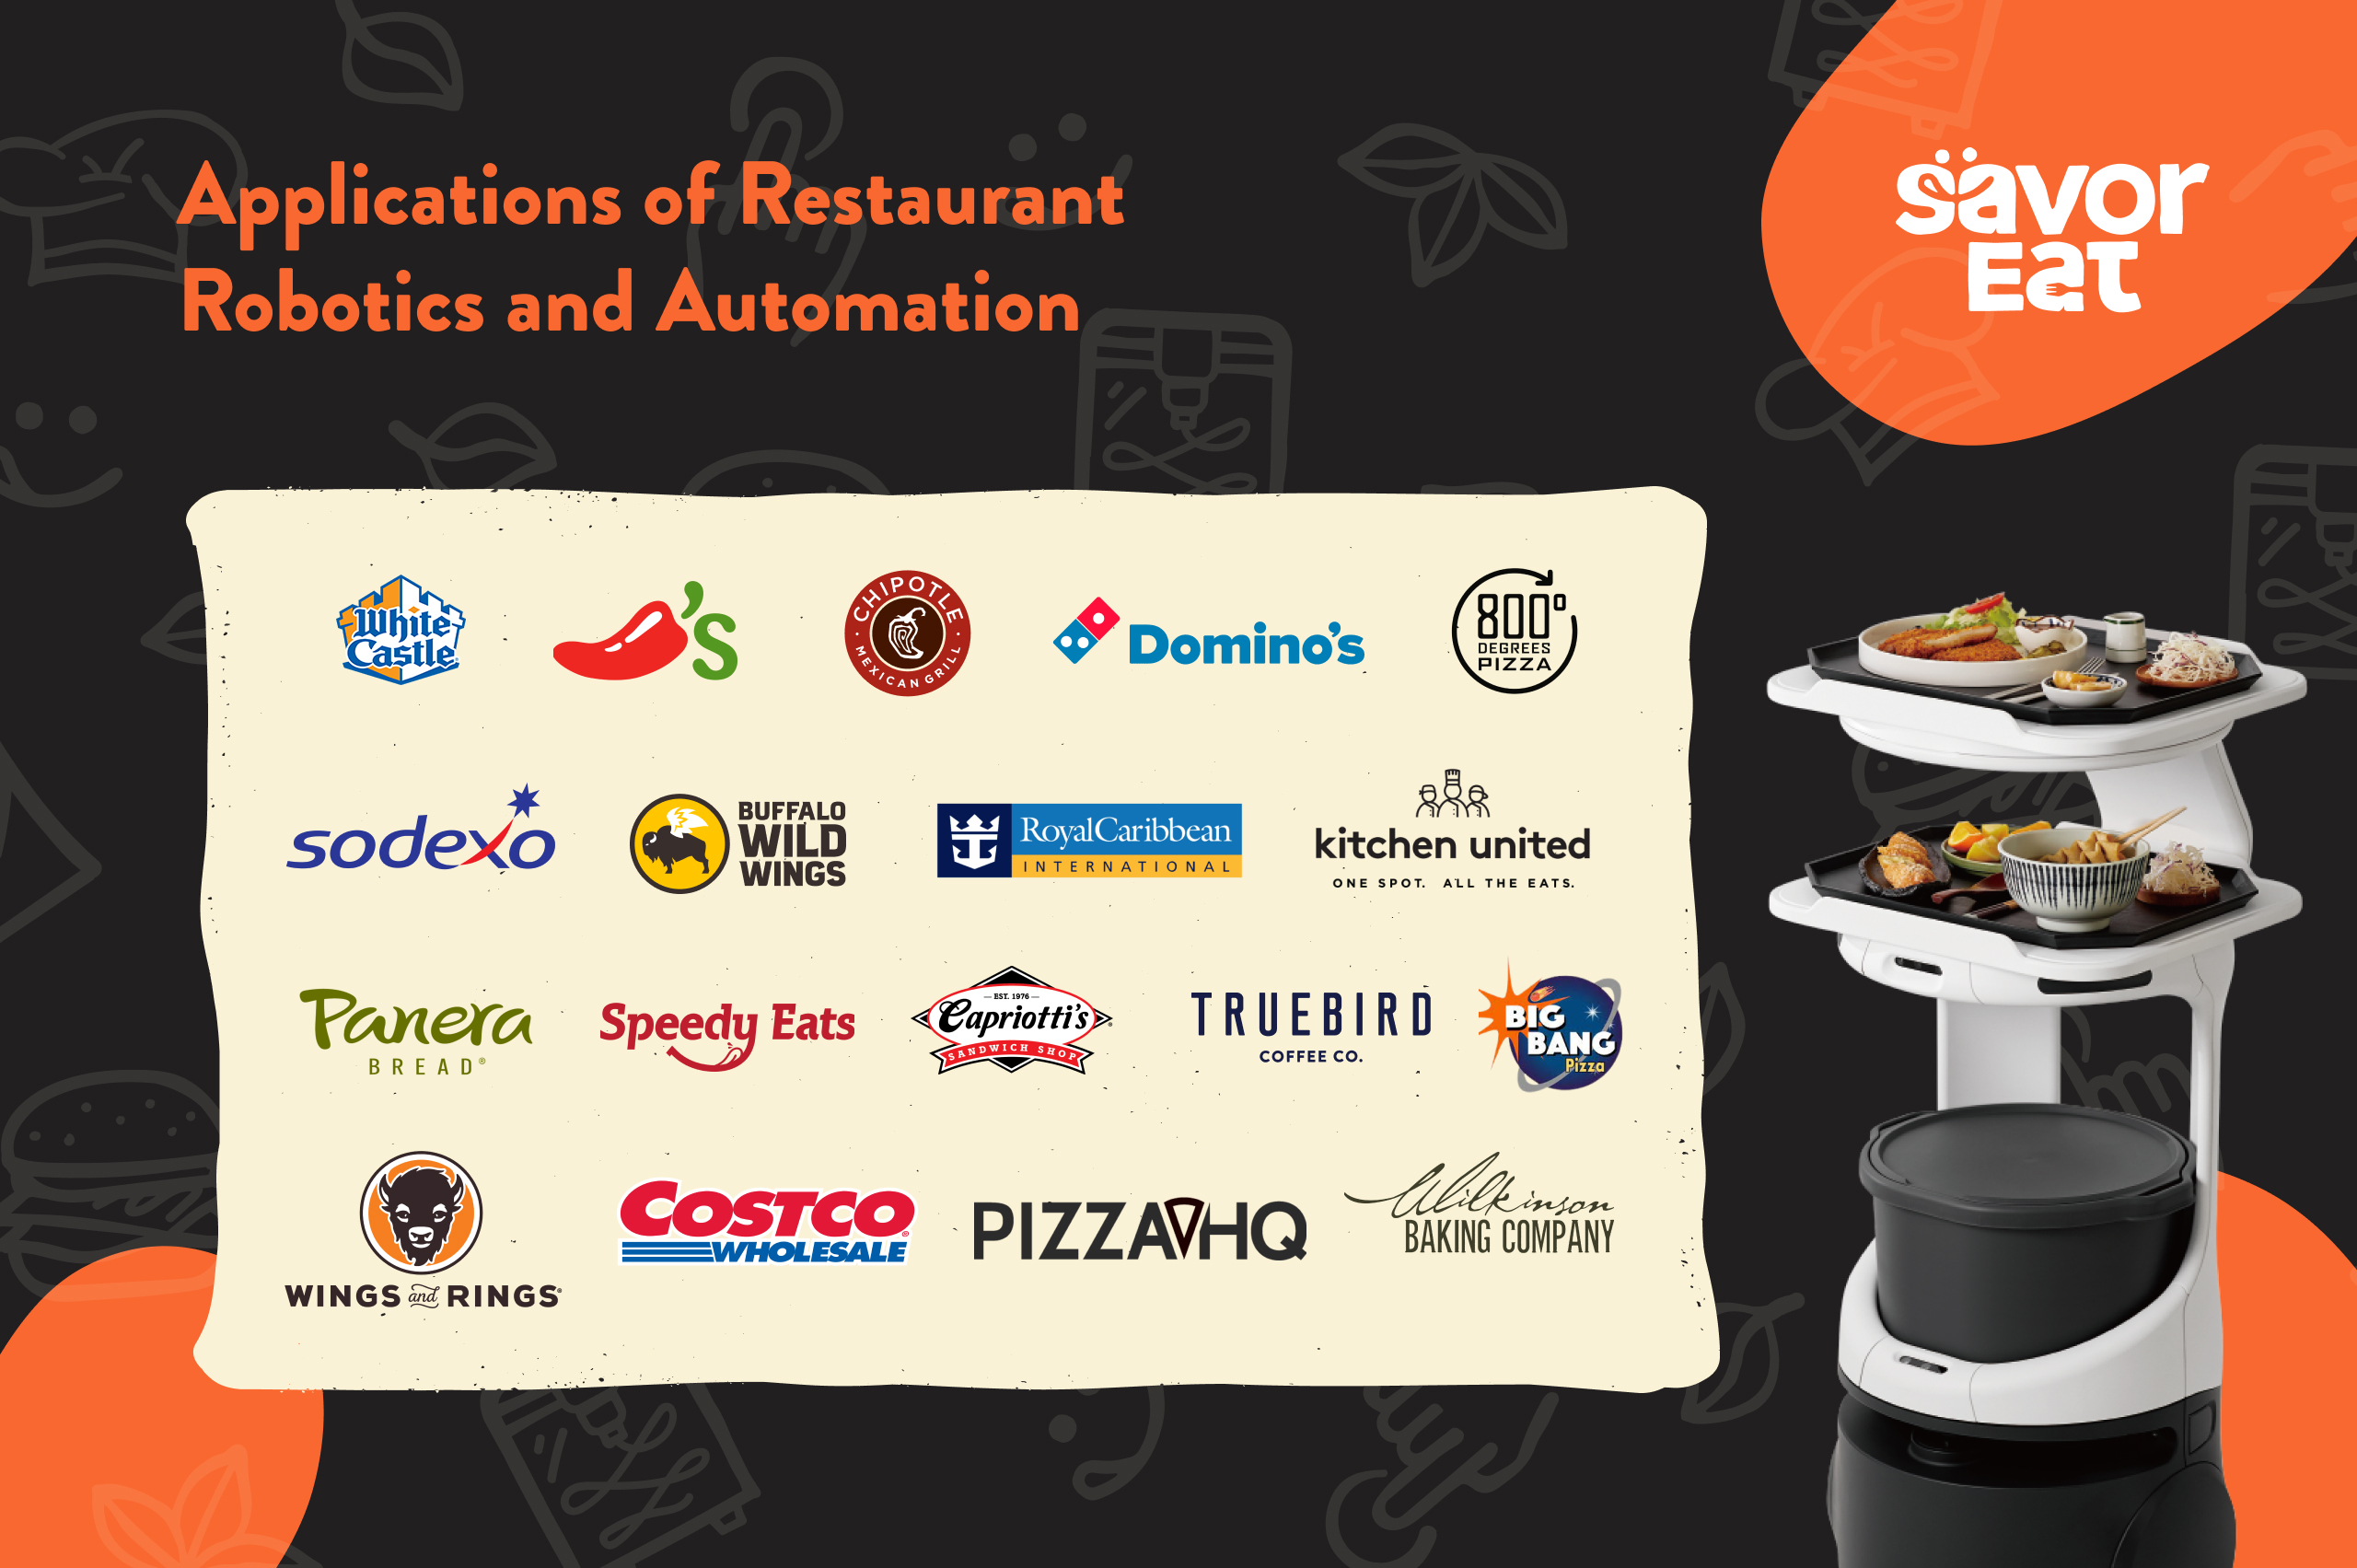 Applications of Restaurant Robotics and Automation